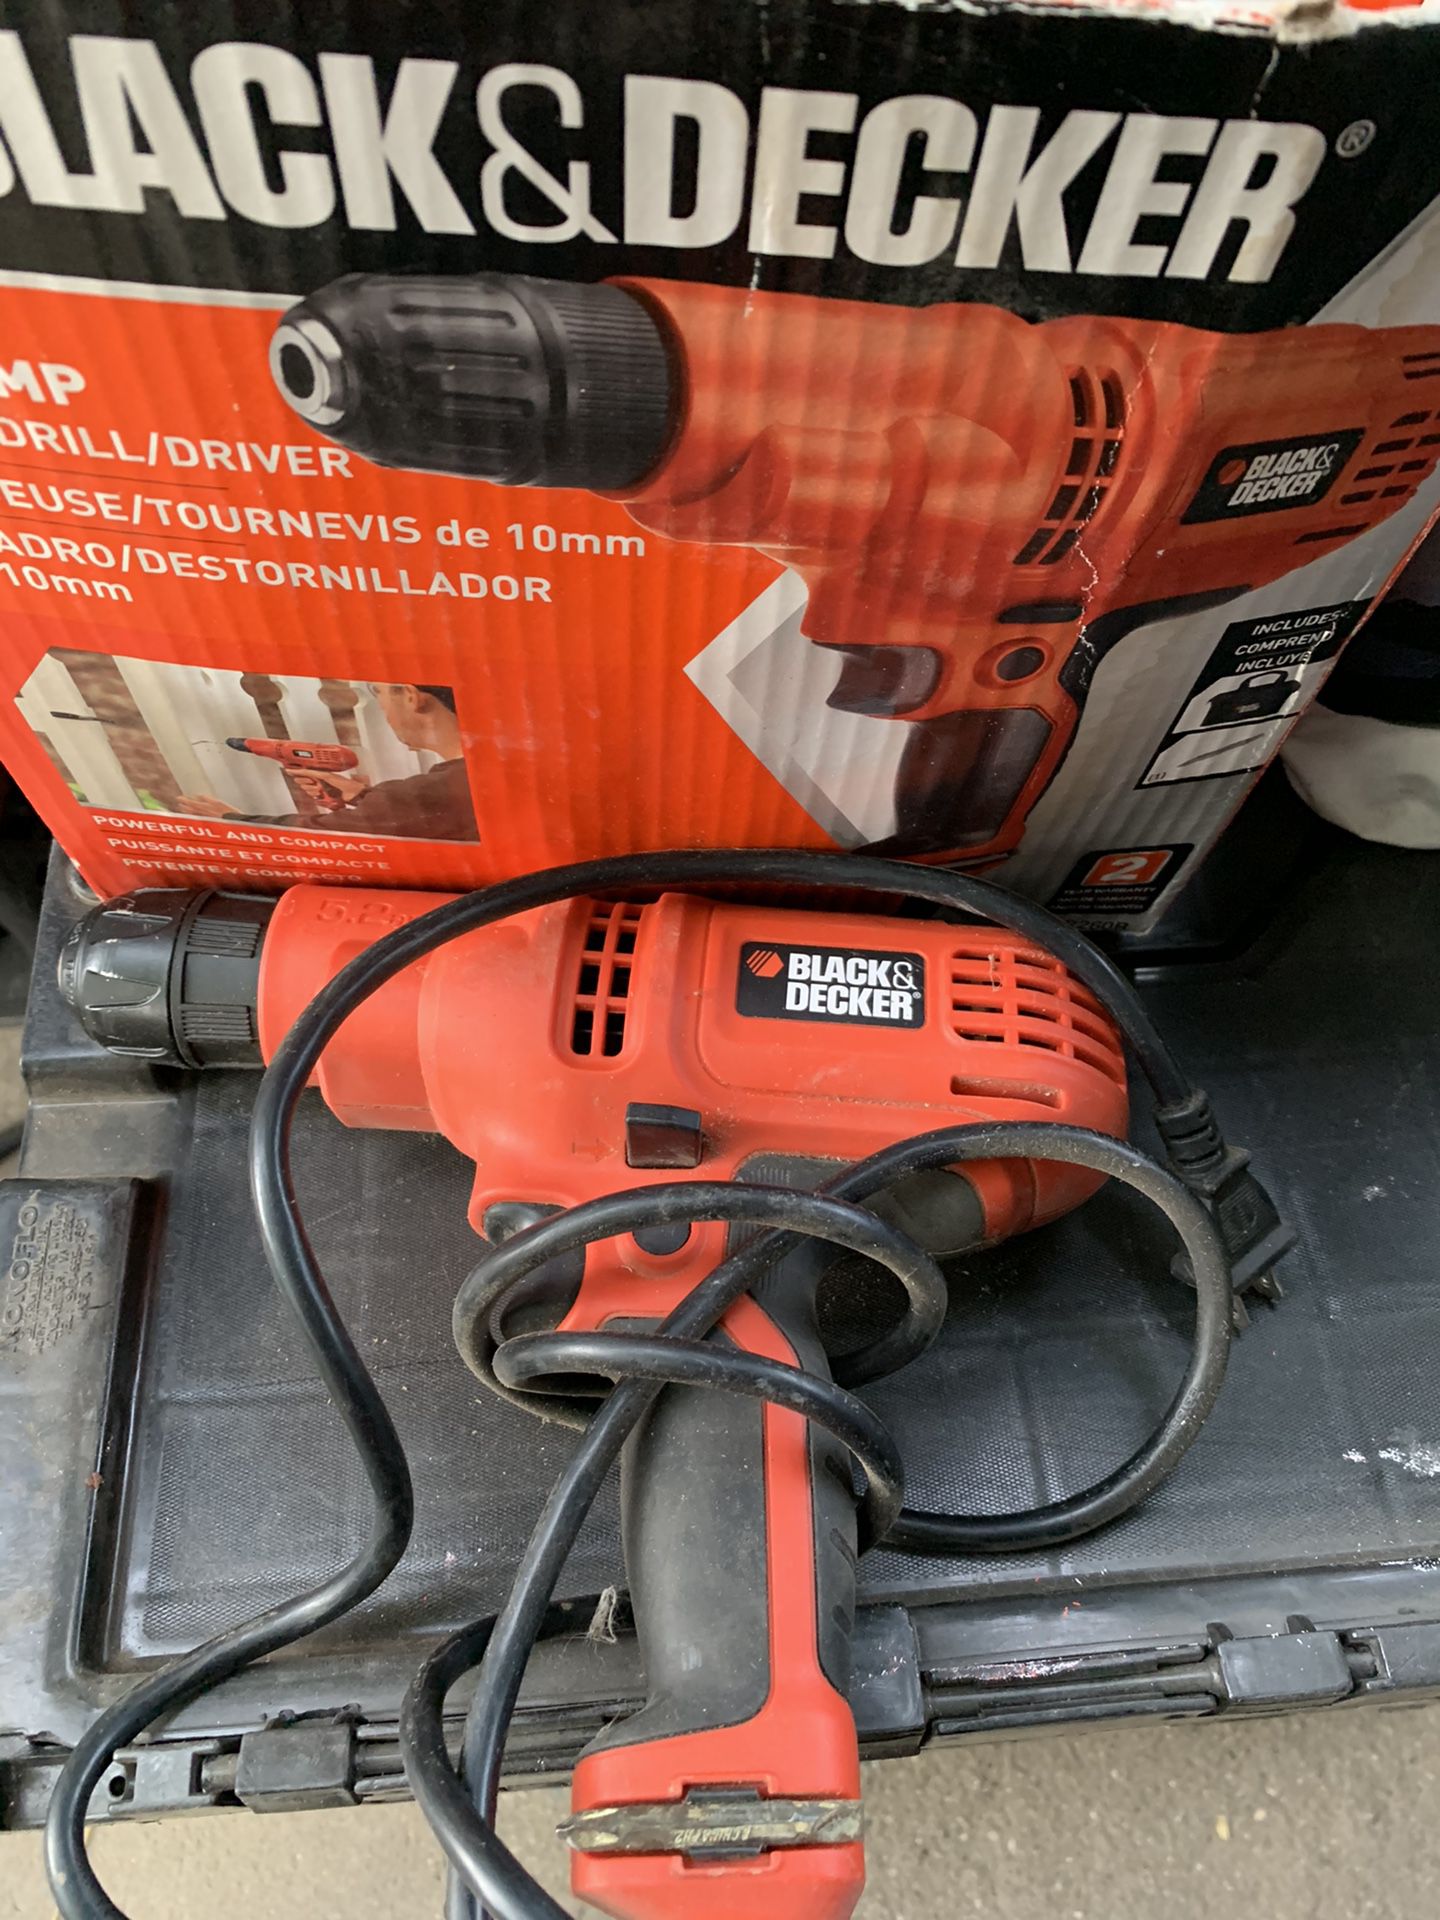 5.2 amp drill and driver